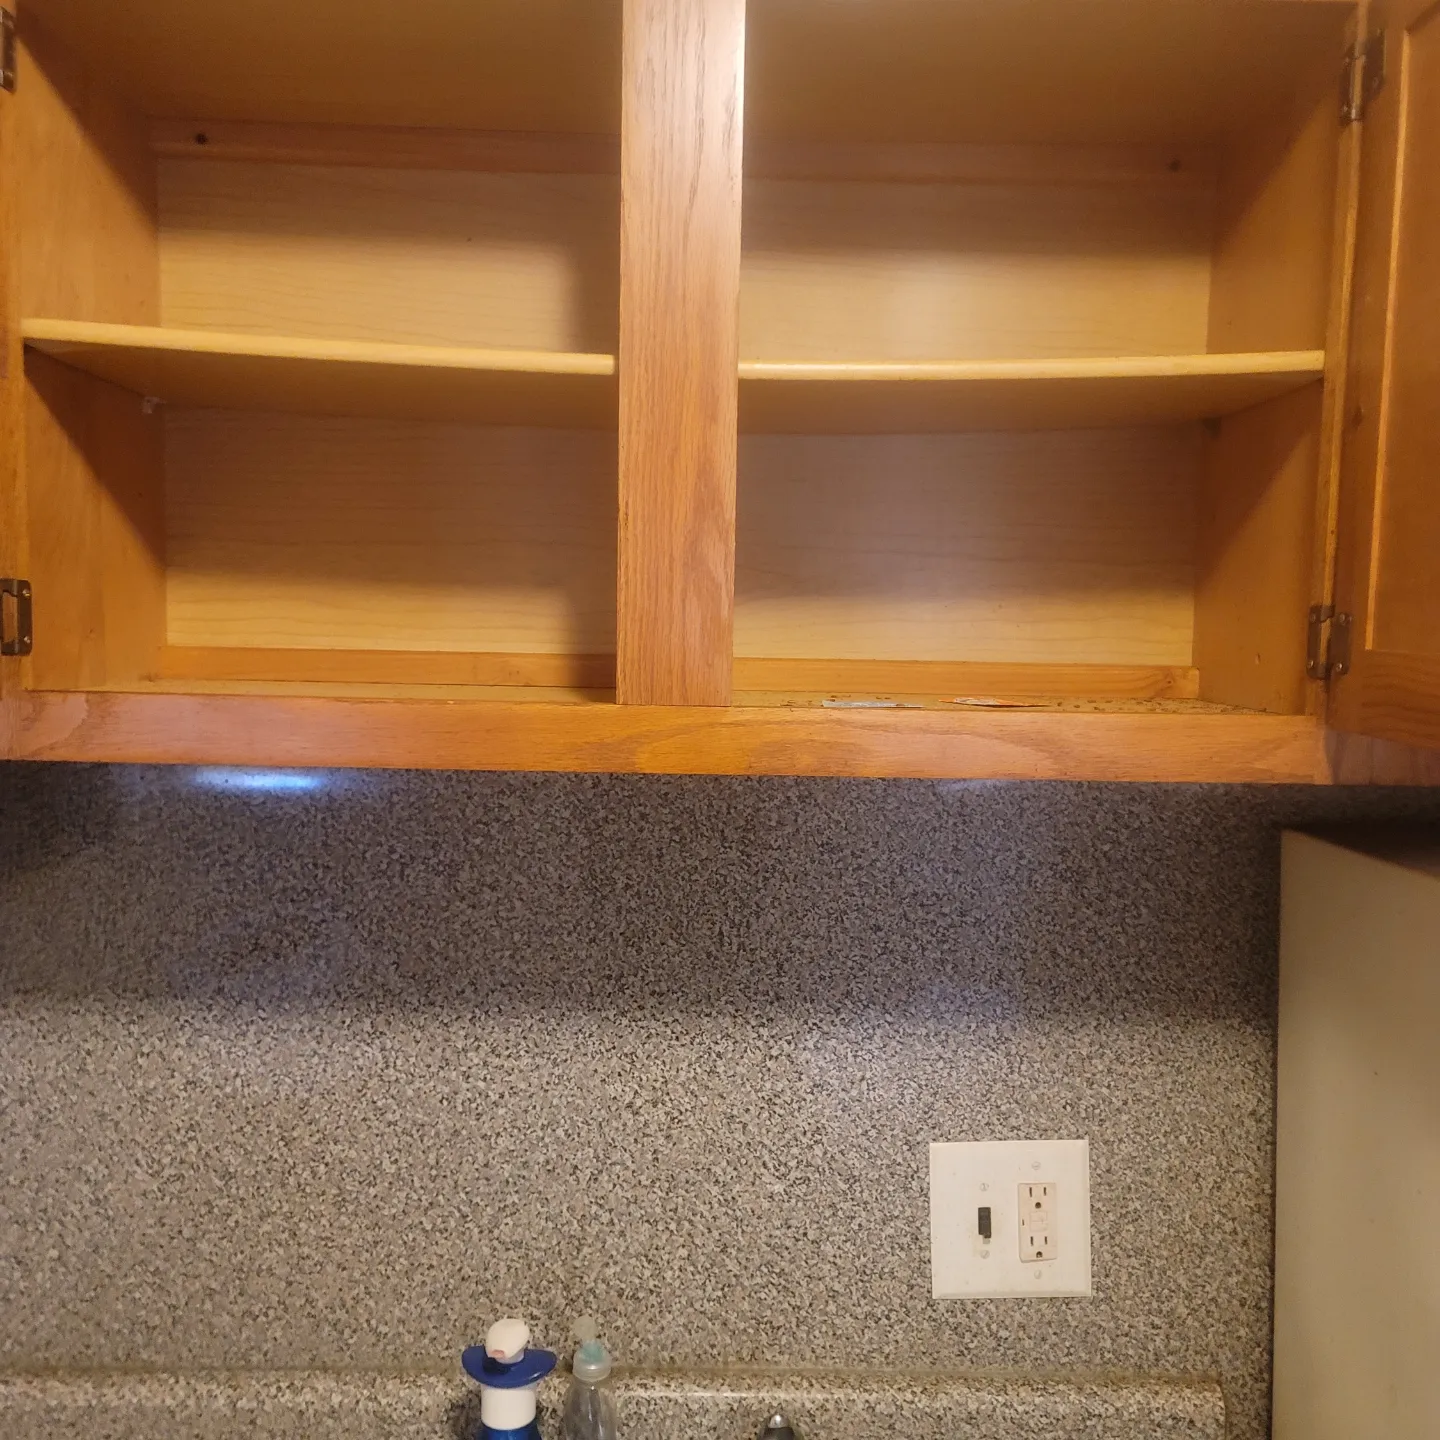 An empty cabinet in a kitchen with a power socket